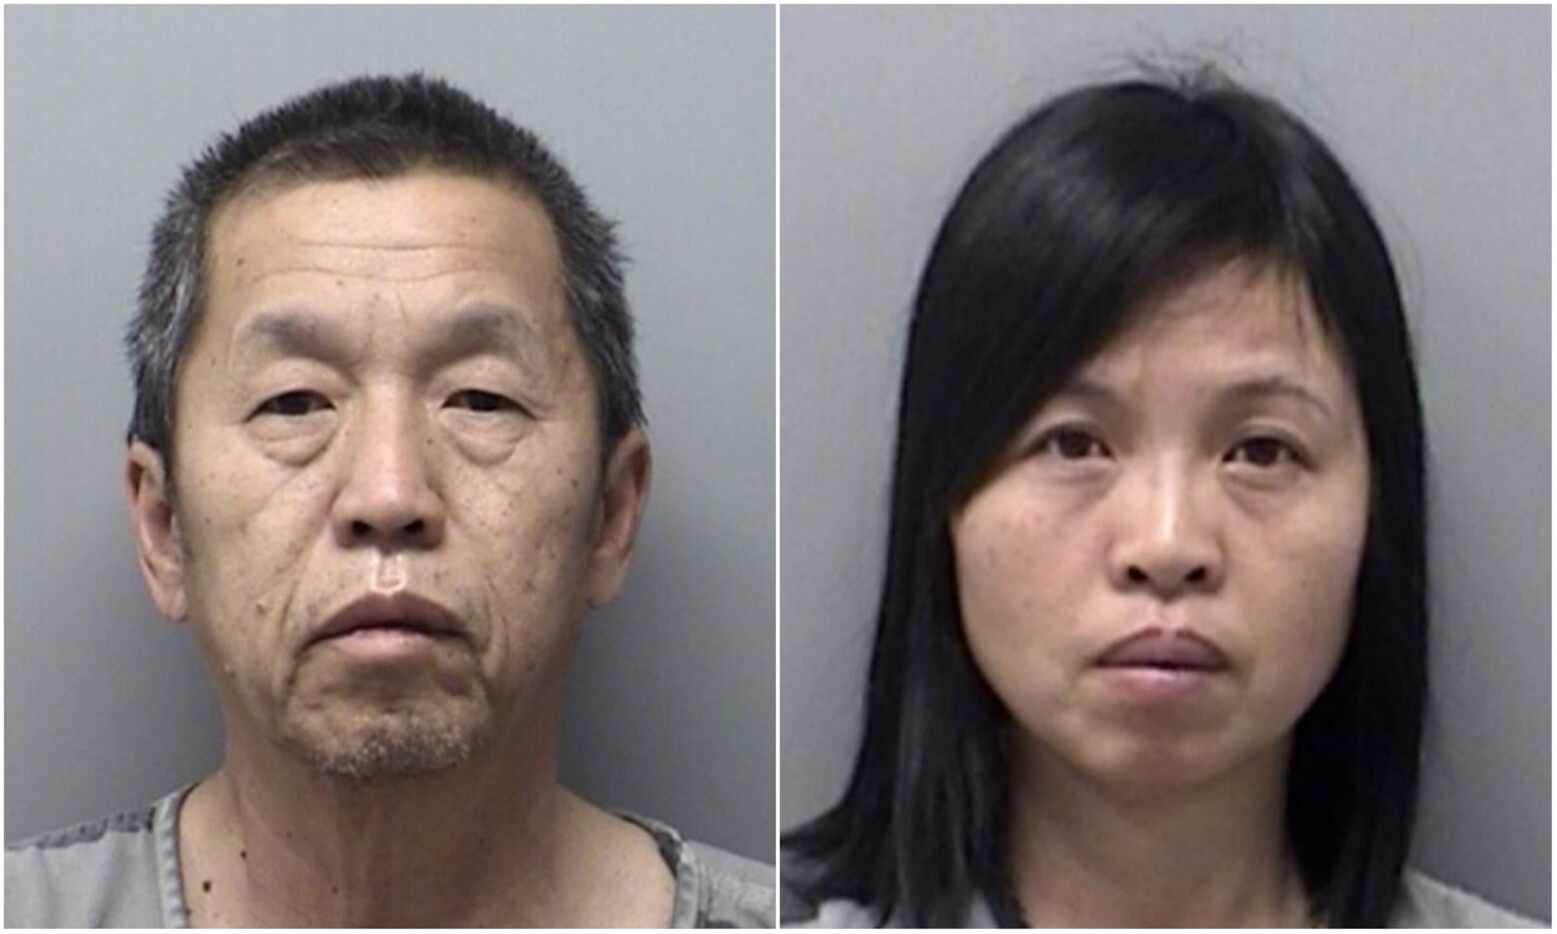 David Kwan, 59, and Cuixin Chen, 45, both from Gardena, Calif. were arrested Sunday and...